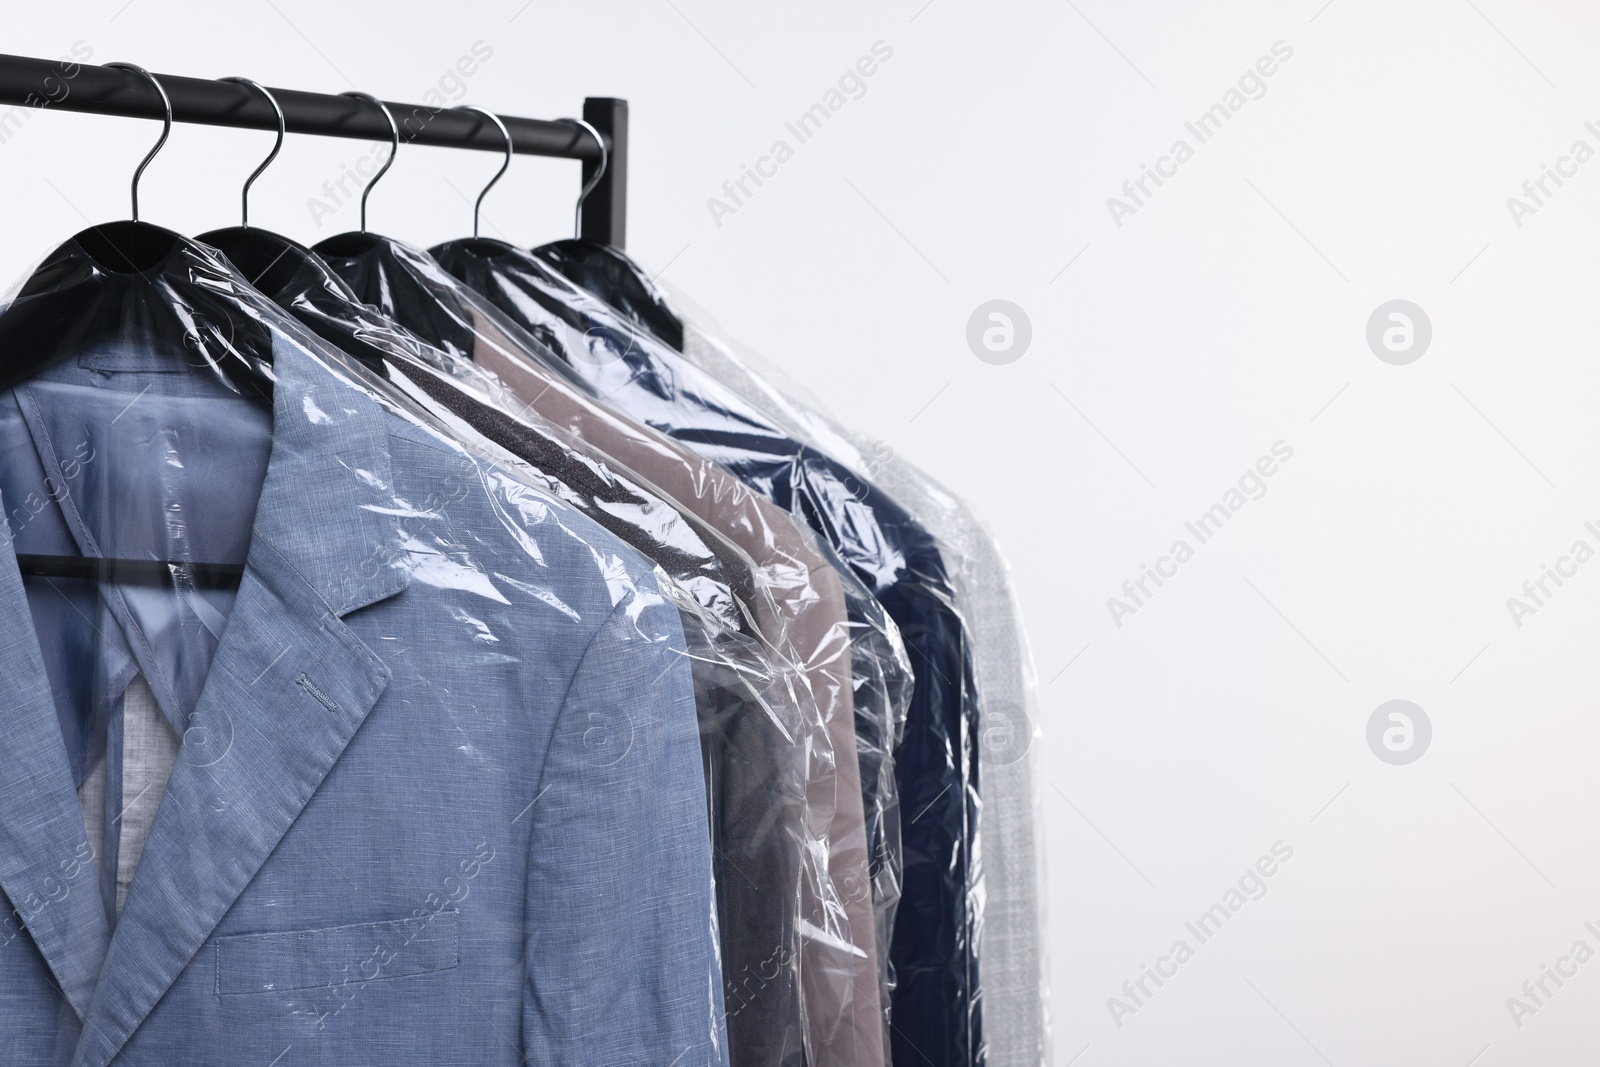 Photo of Dry-cleaning service. Many different clothes in plastic bags hanging on rack against white background, space for text